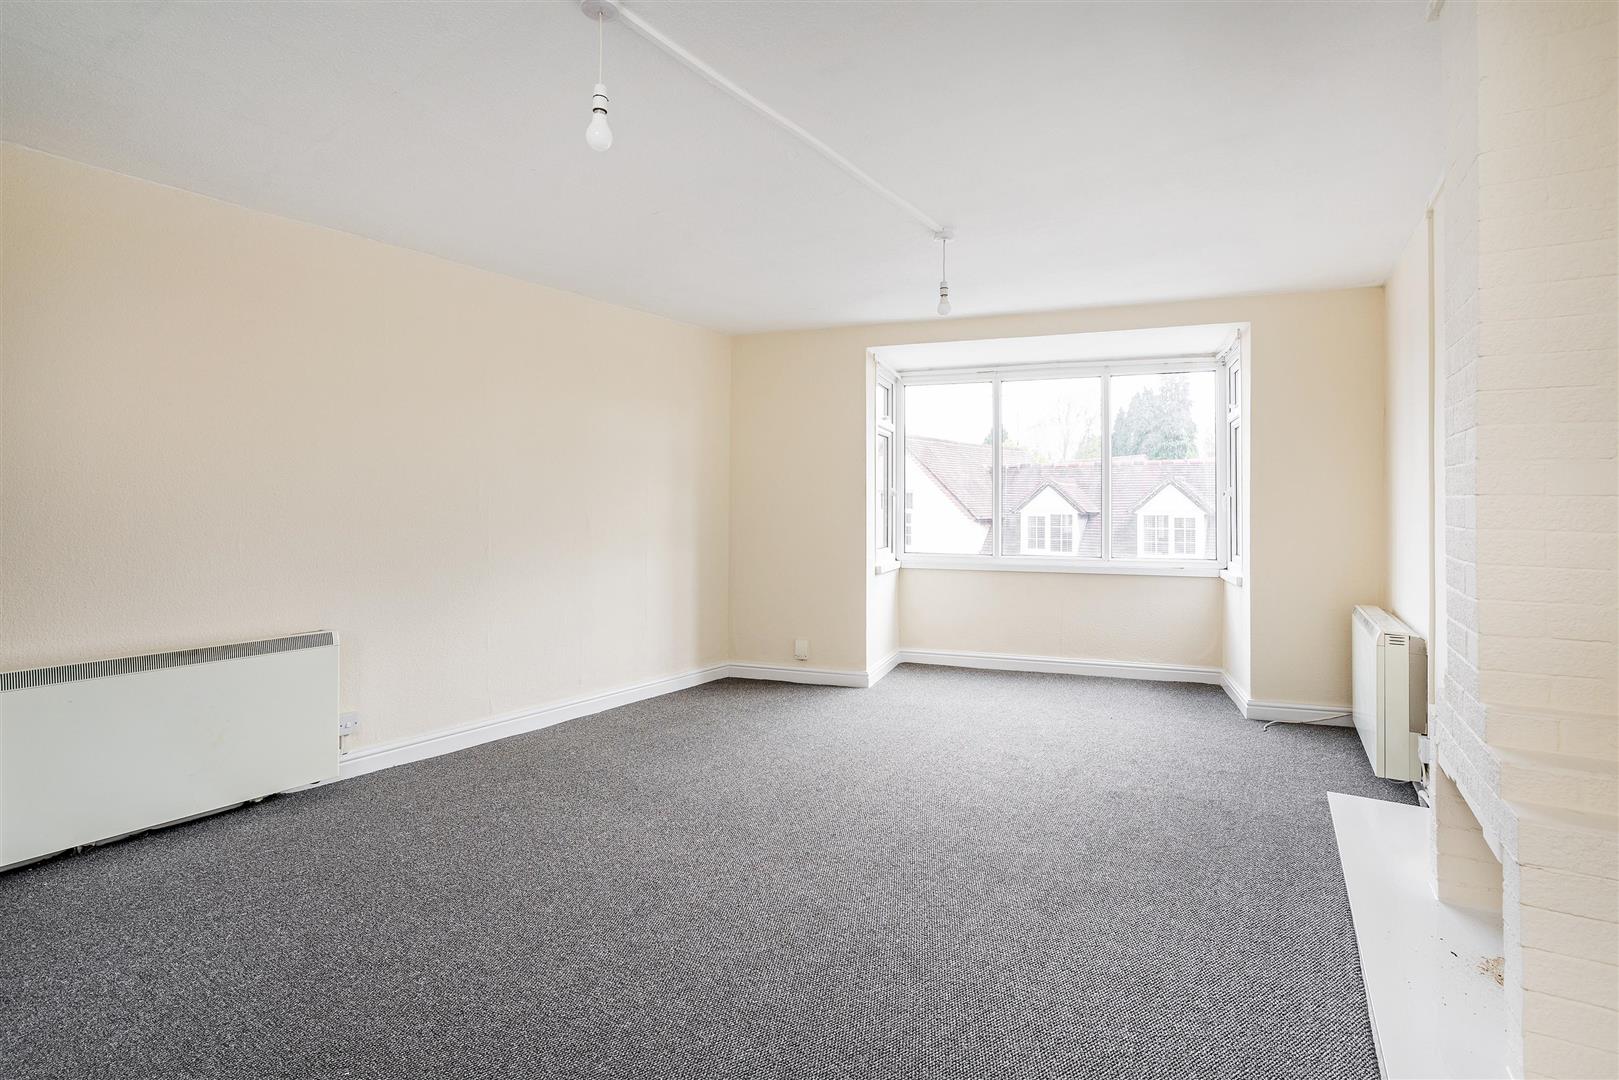 3 bed  to rent in High Street, Solihull, B93 